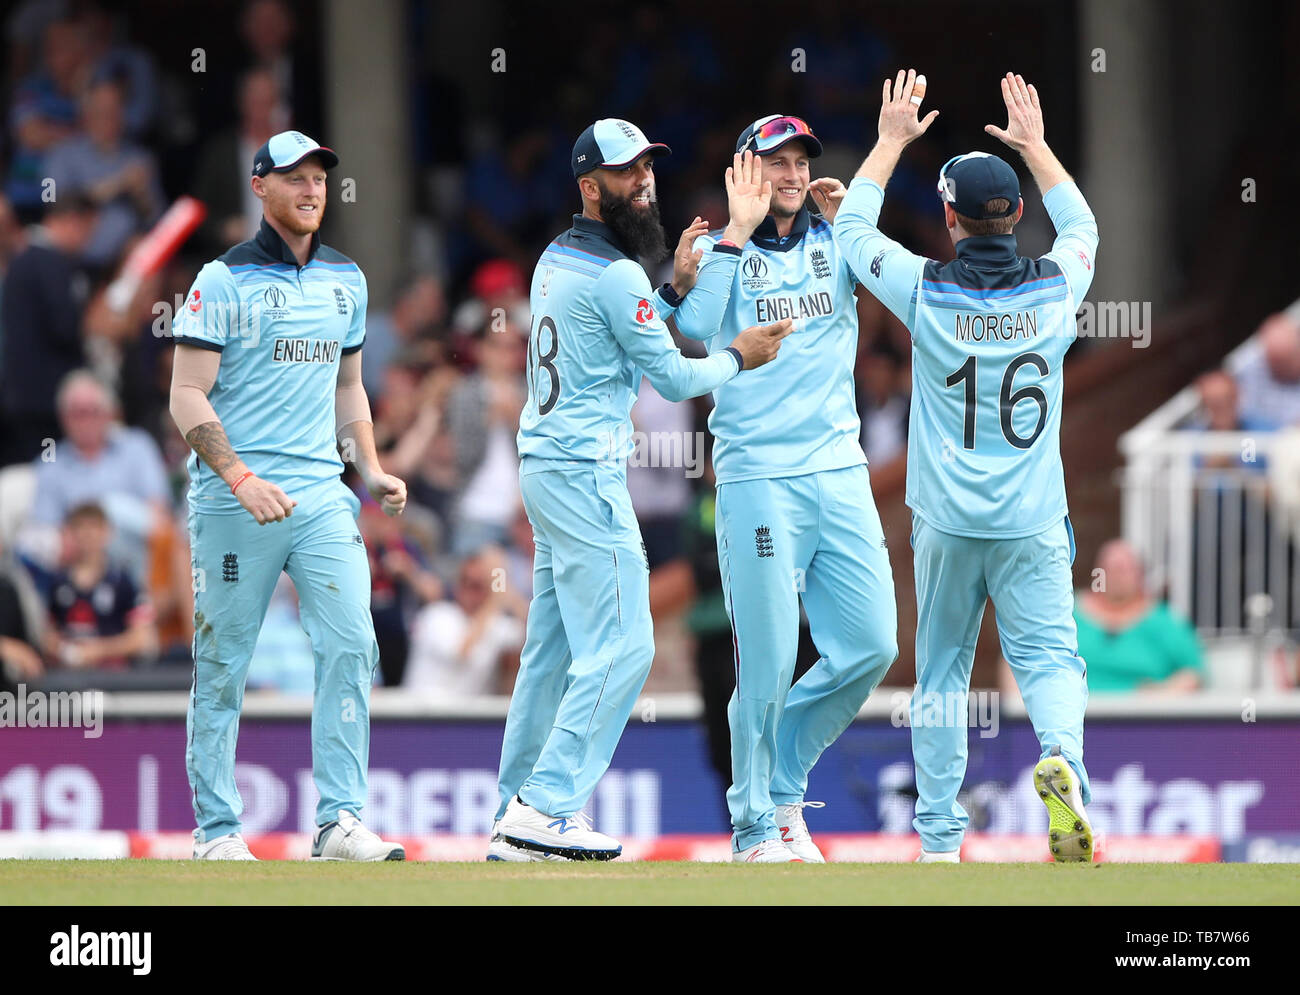 England's Joe Root (centre) celebrates catching out South Africa's Quinton de Kock (not pictured) out with team-mates during the ICC Cricket World Cup group stage match at The Oval, London. Stock Photo